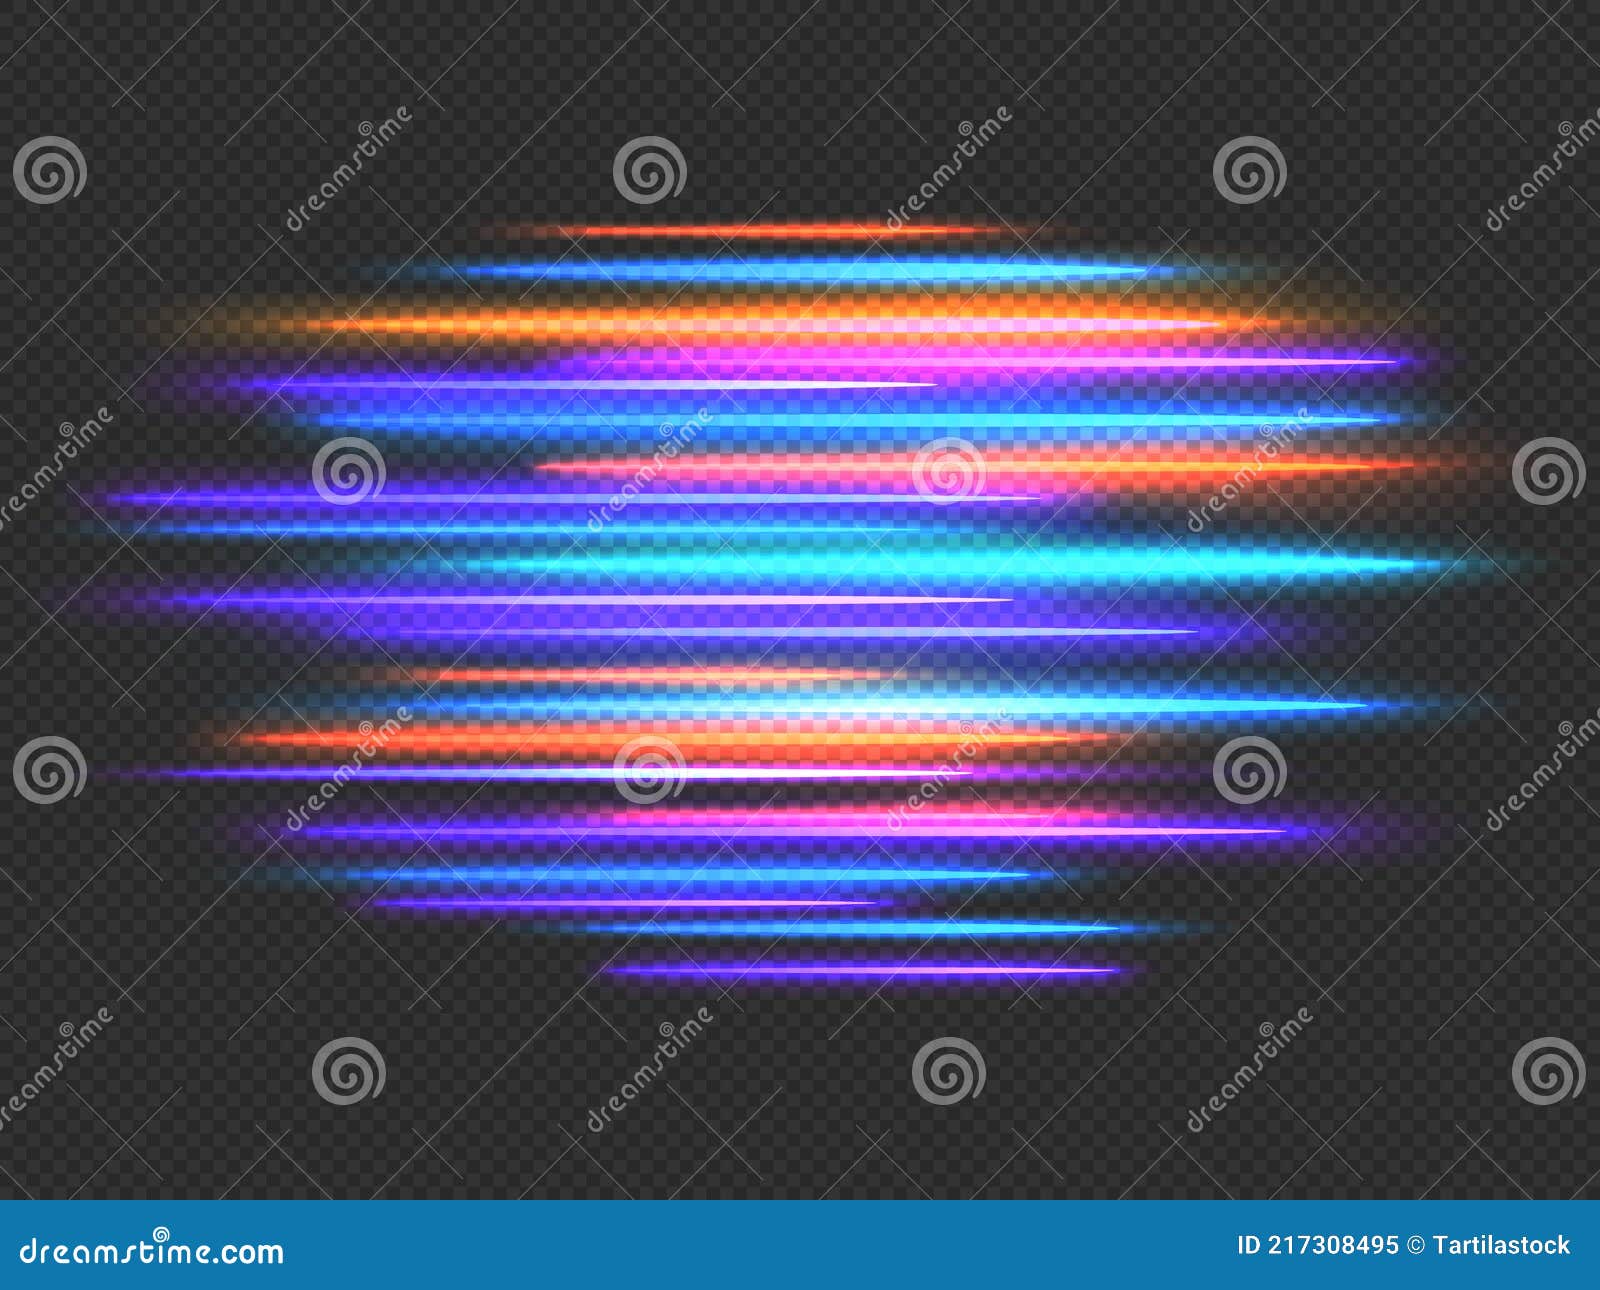 Dazzling neon lights captured in motion, the blurred lines forming